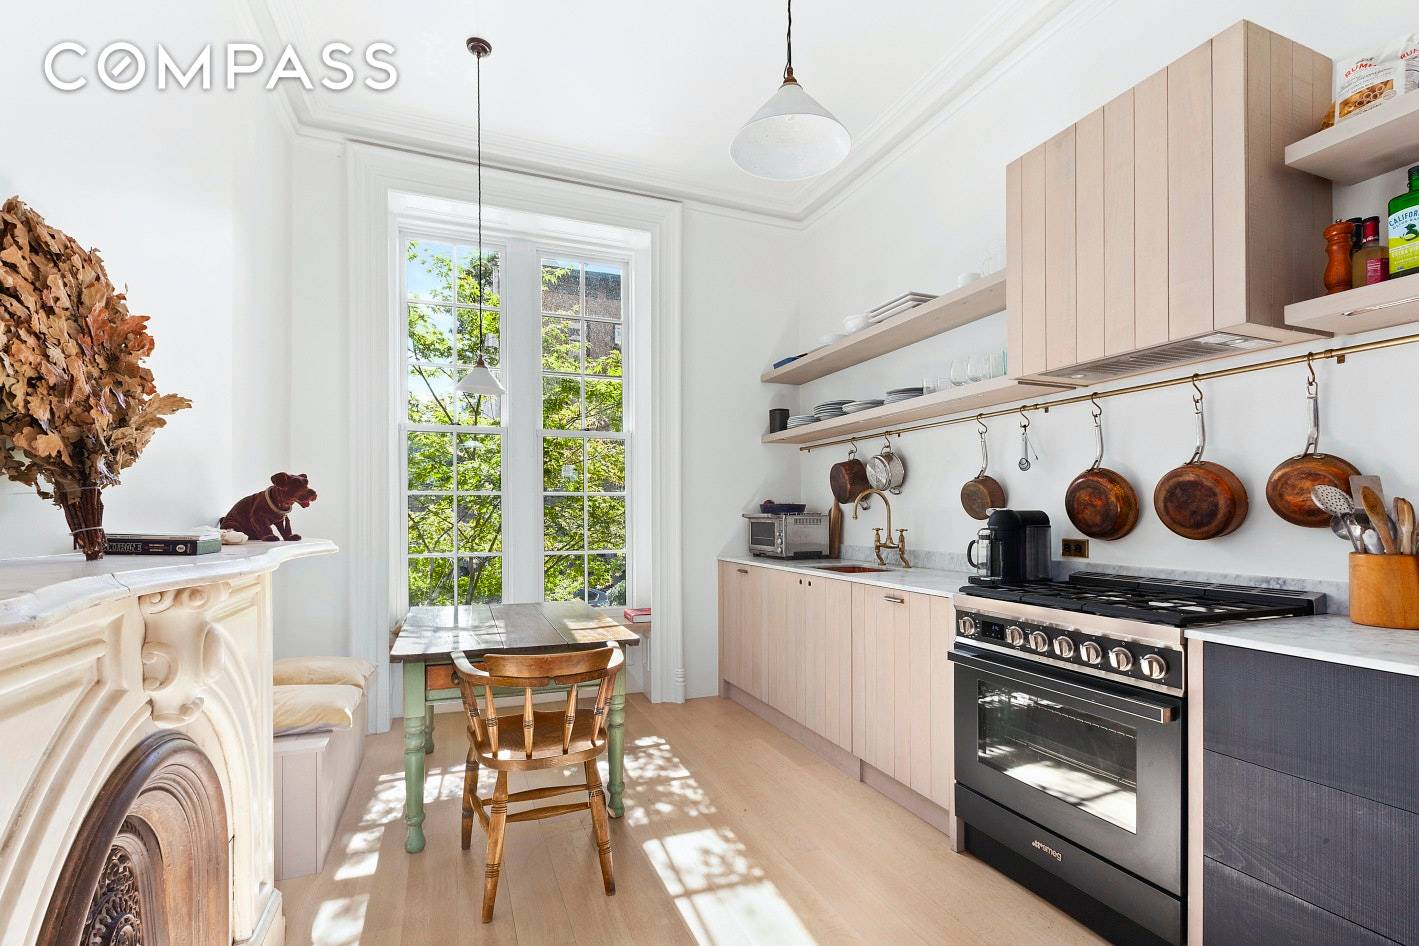 A truly unique opportunity to experience brownstone living in this gorgeous townhouse at 321 State Street in Boerum Hill.